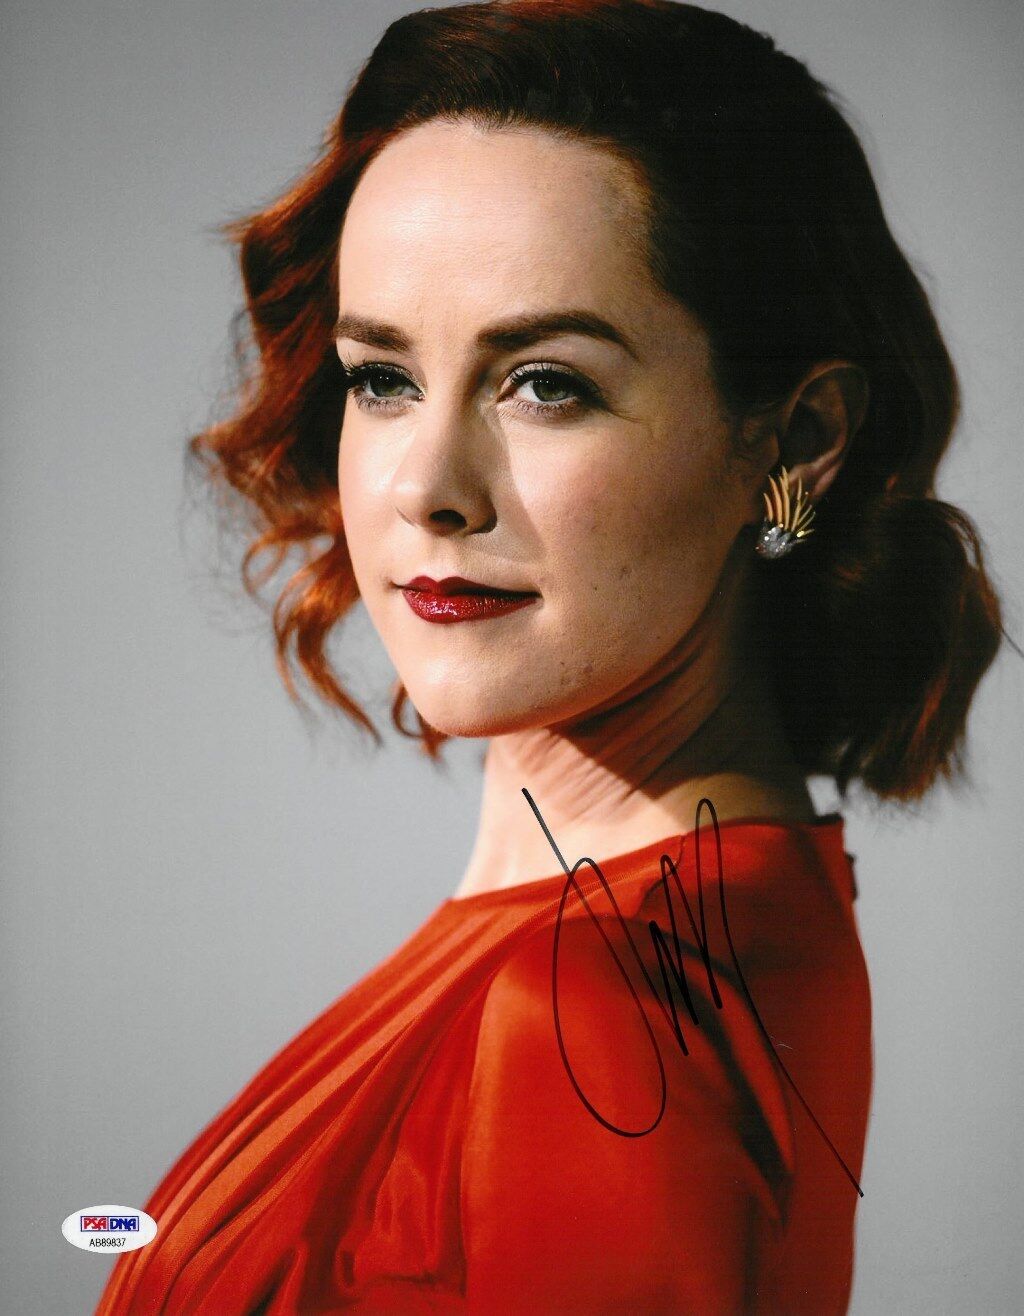 Jena Malone Signed Authentic Autographed 11x14 Photo Poster painting PSA/DNA #AB89837